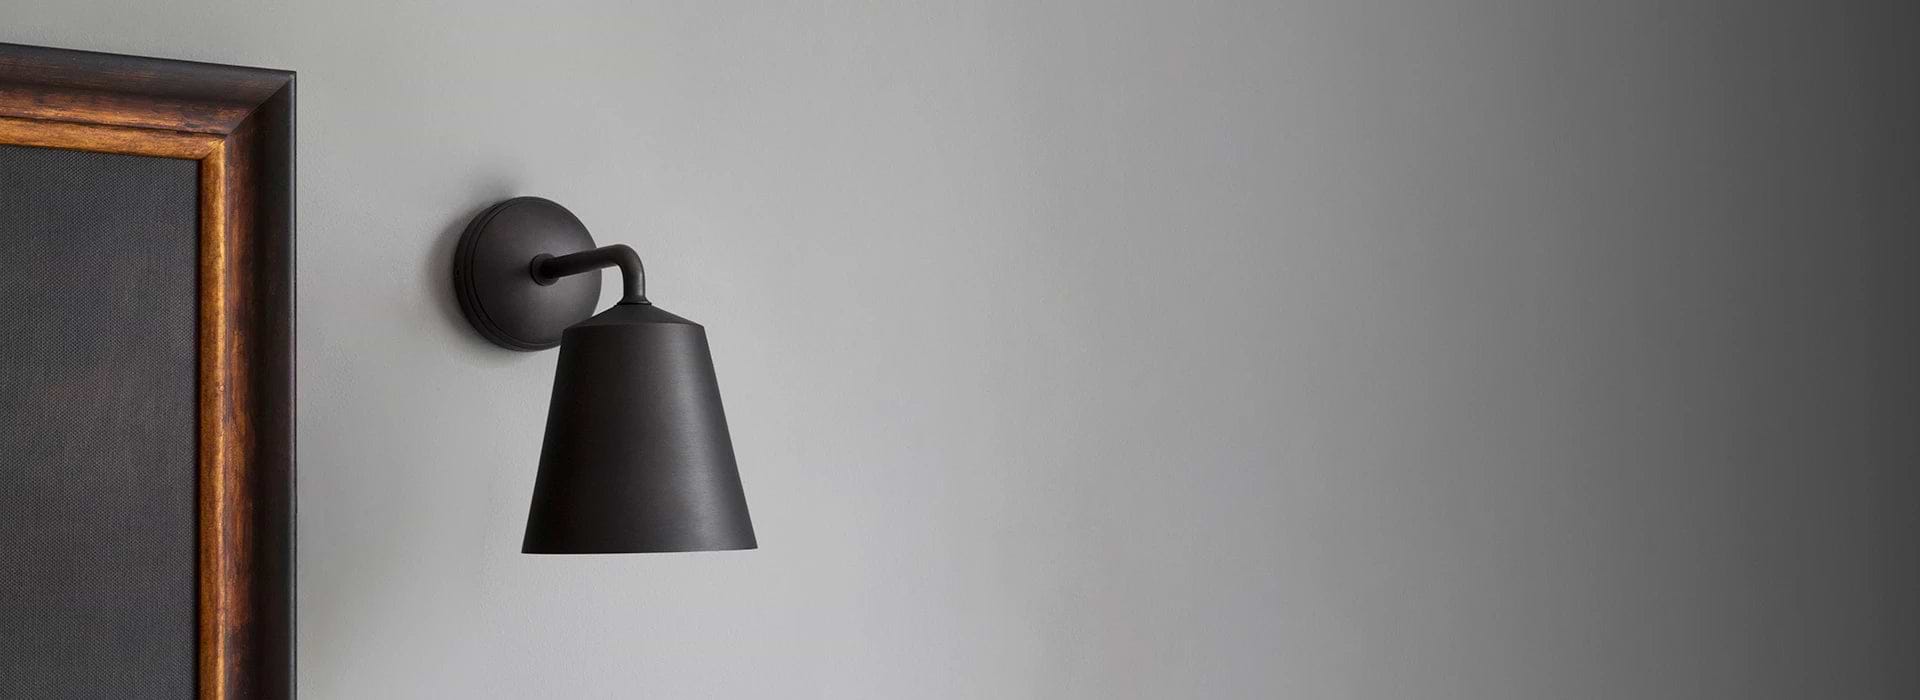 Bronze wall light by Corston on grey Background